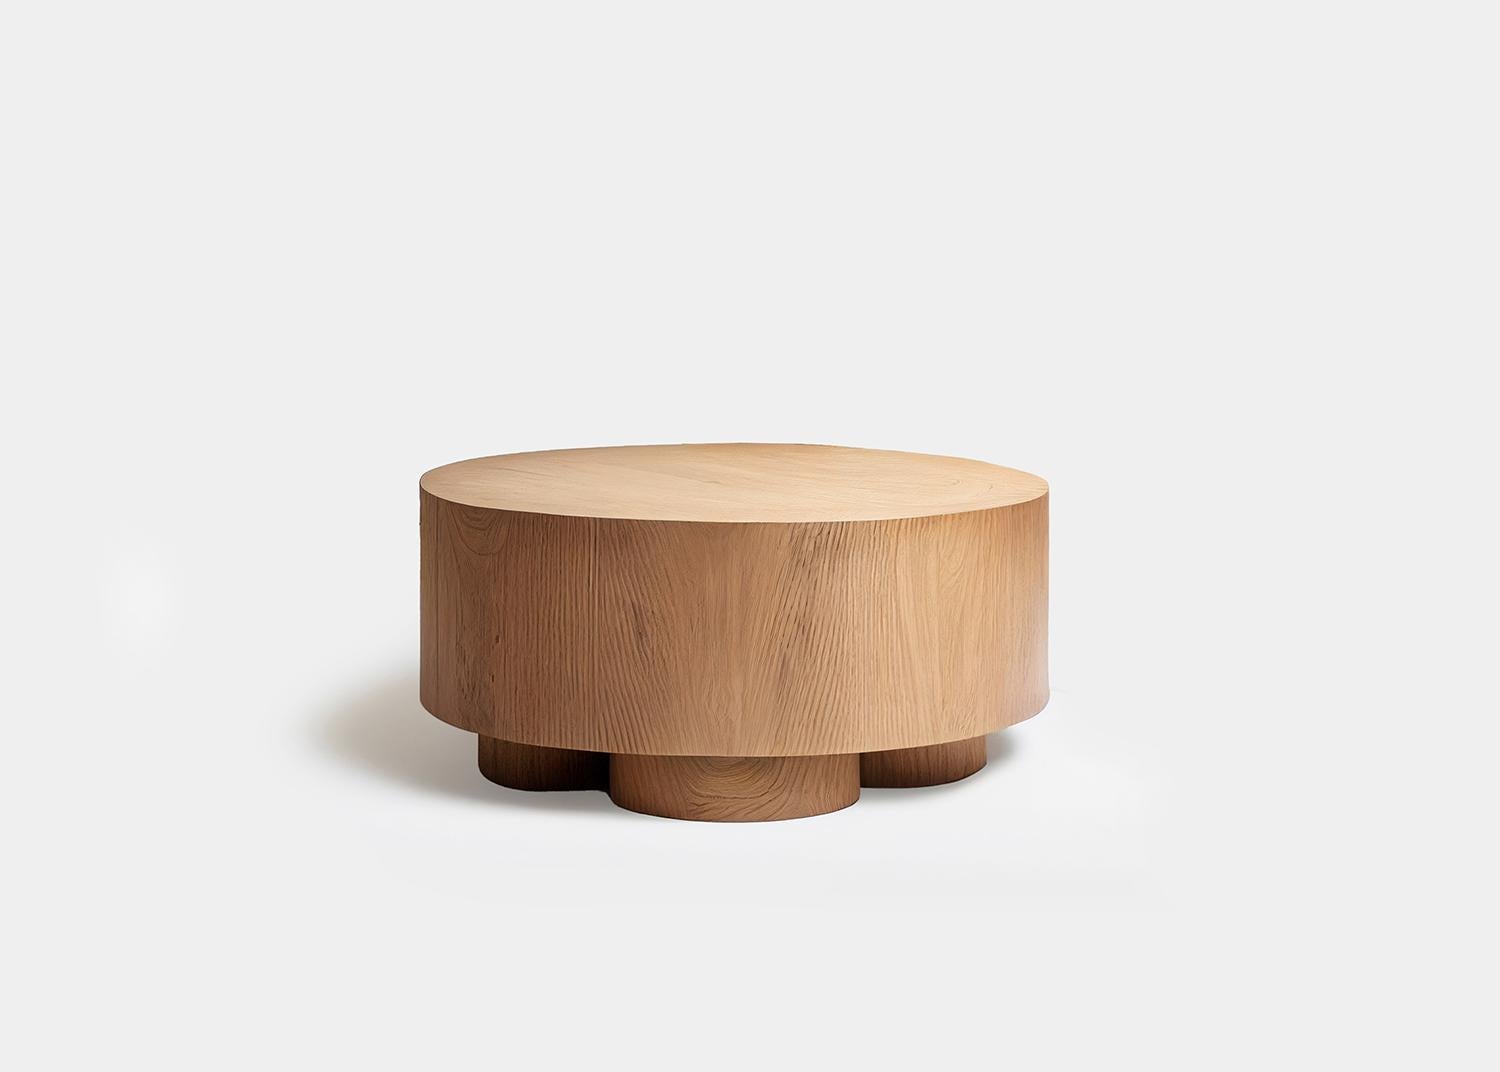 Brutalist Round Coffee Table in Red Oak Wood Veneer, Podio by NONO 1